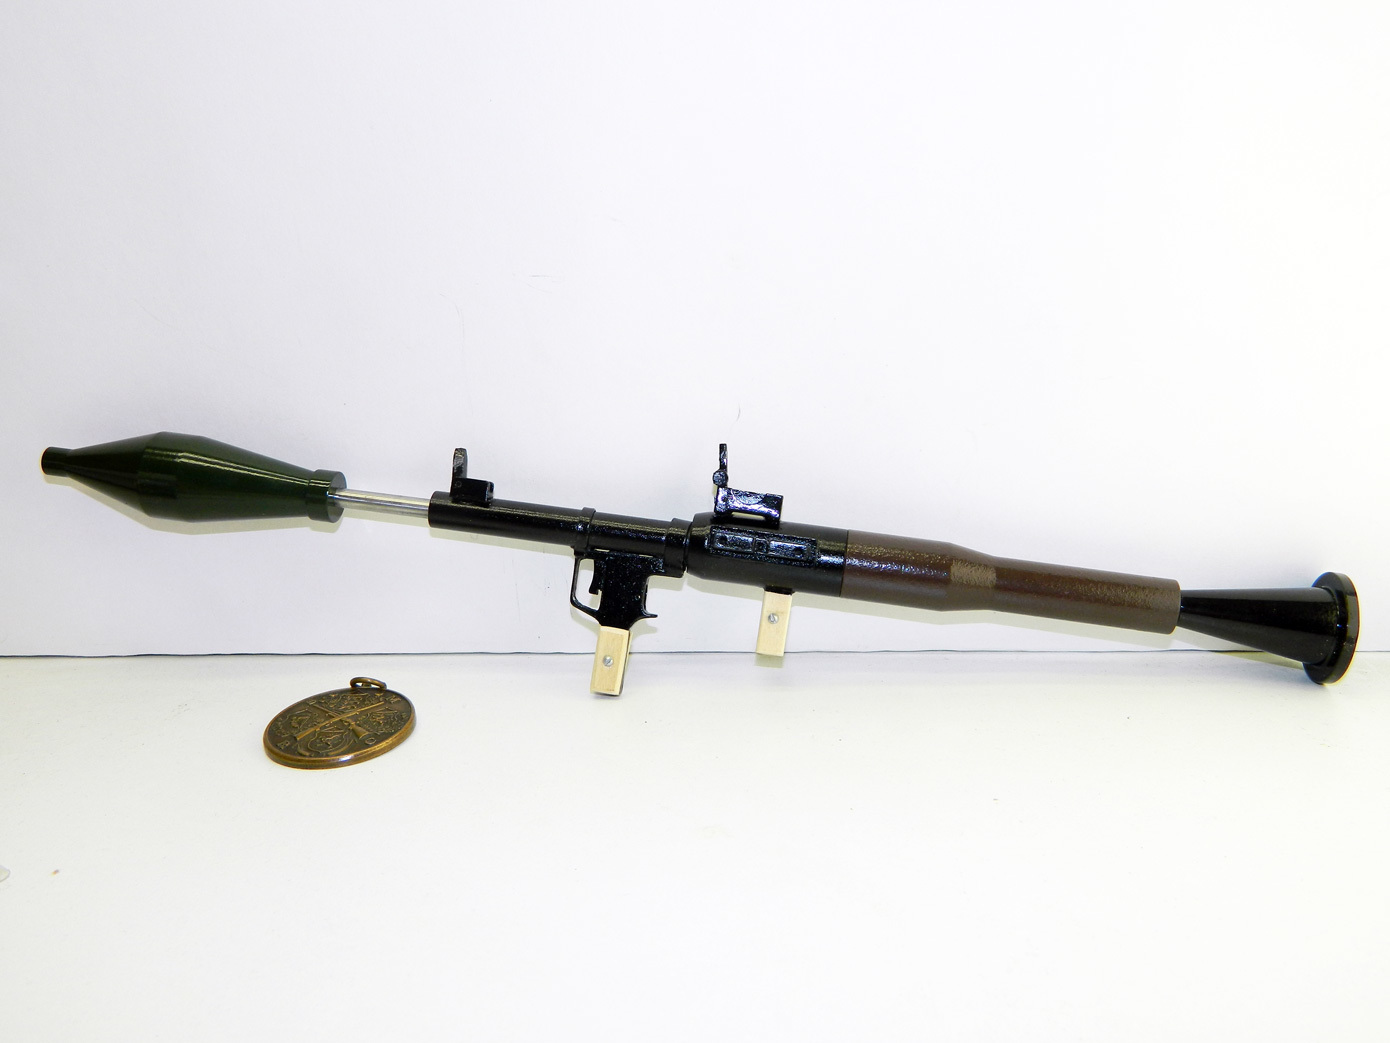 Model Russian RPG-7 scale of 1:3